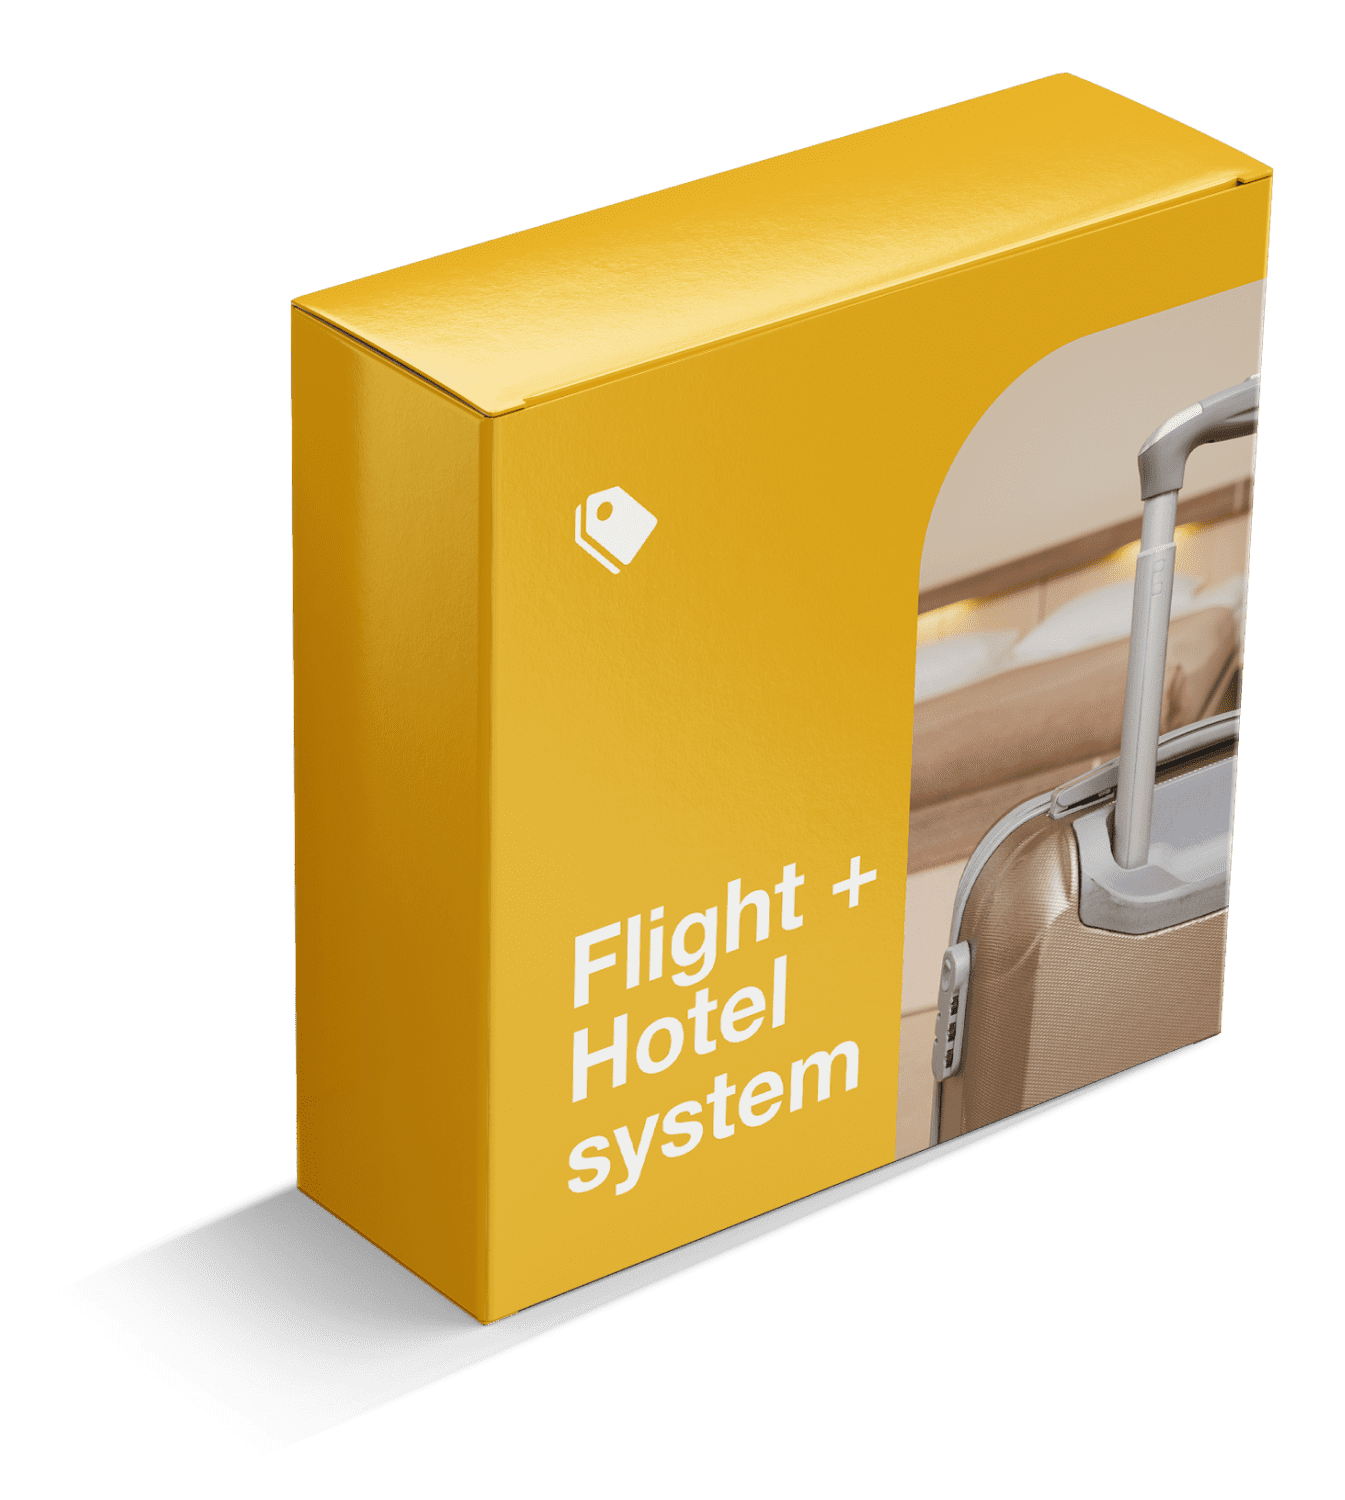 Flight + hotel packages